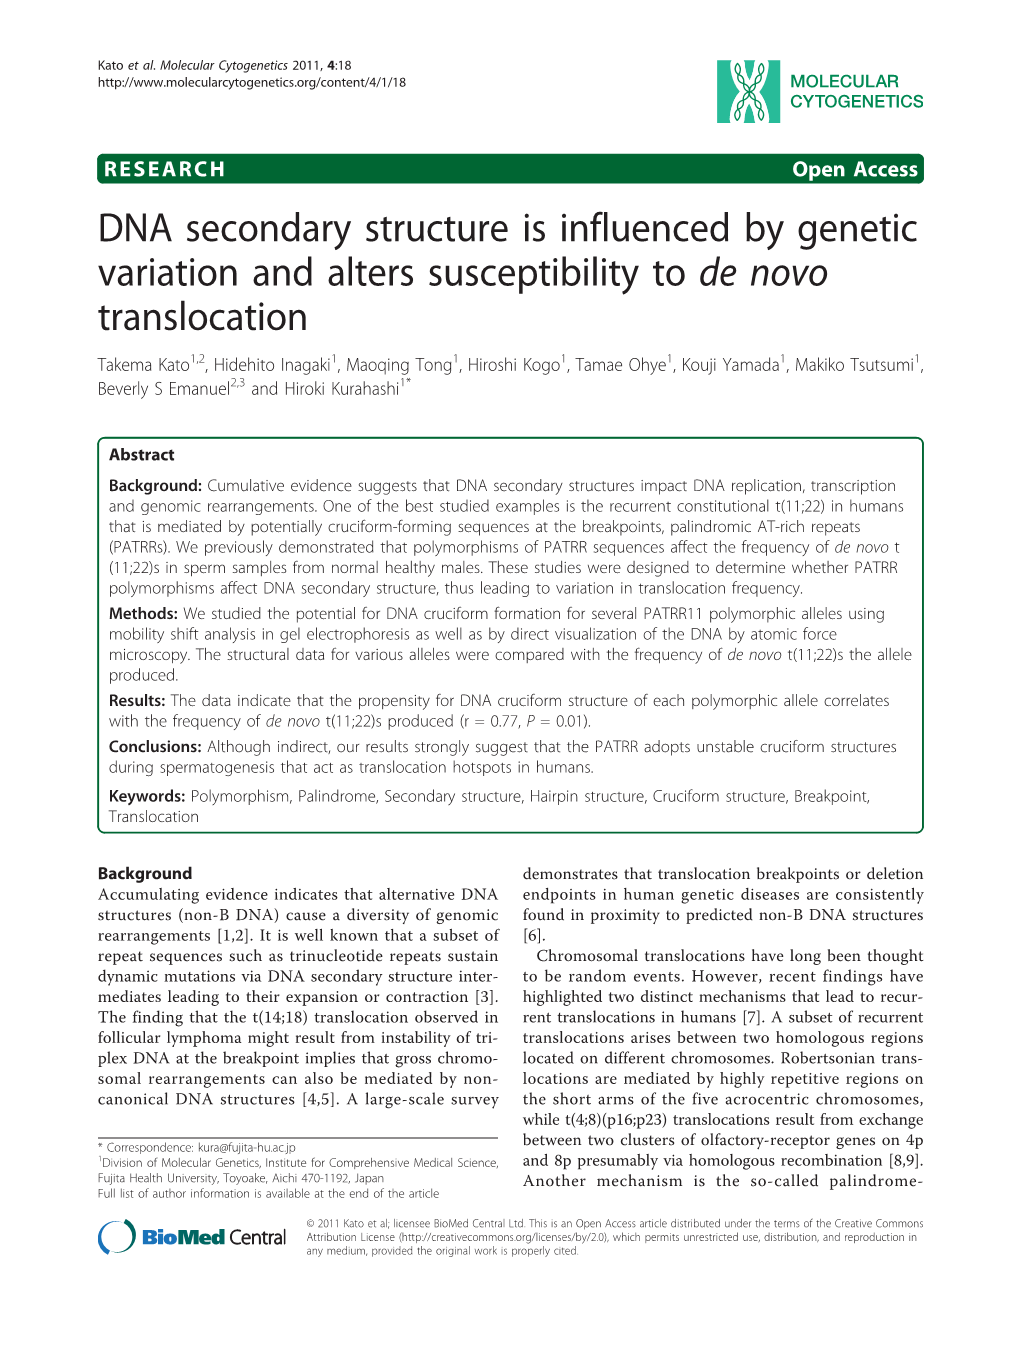 DNA Secondary Structure Is Influenced by Genetic Variation and Alters Susceptibility to De Novo Translocation